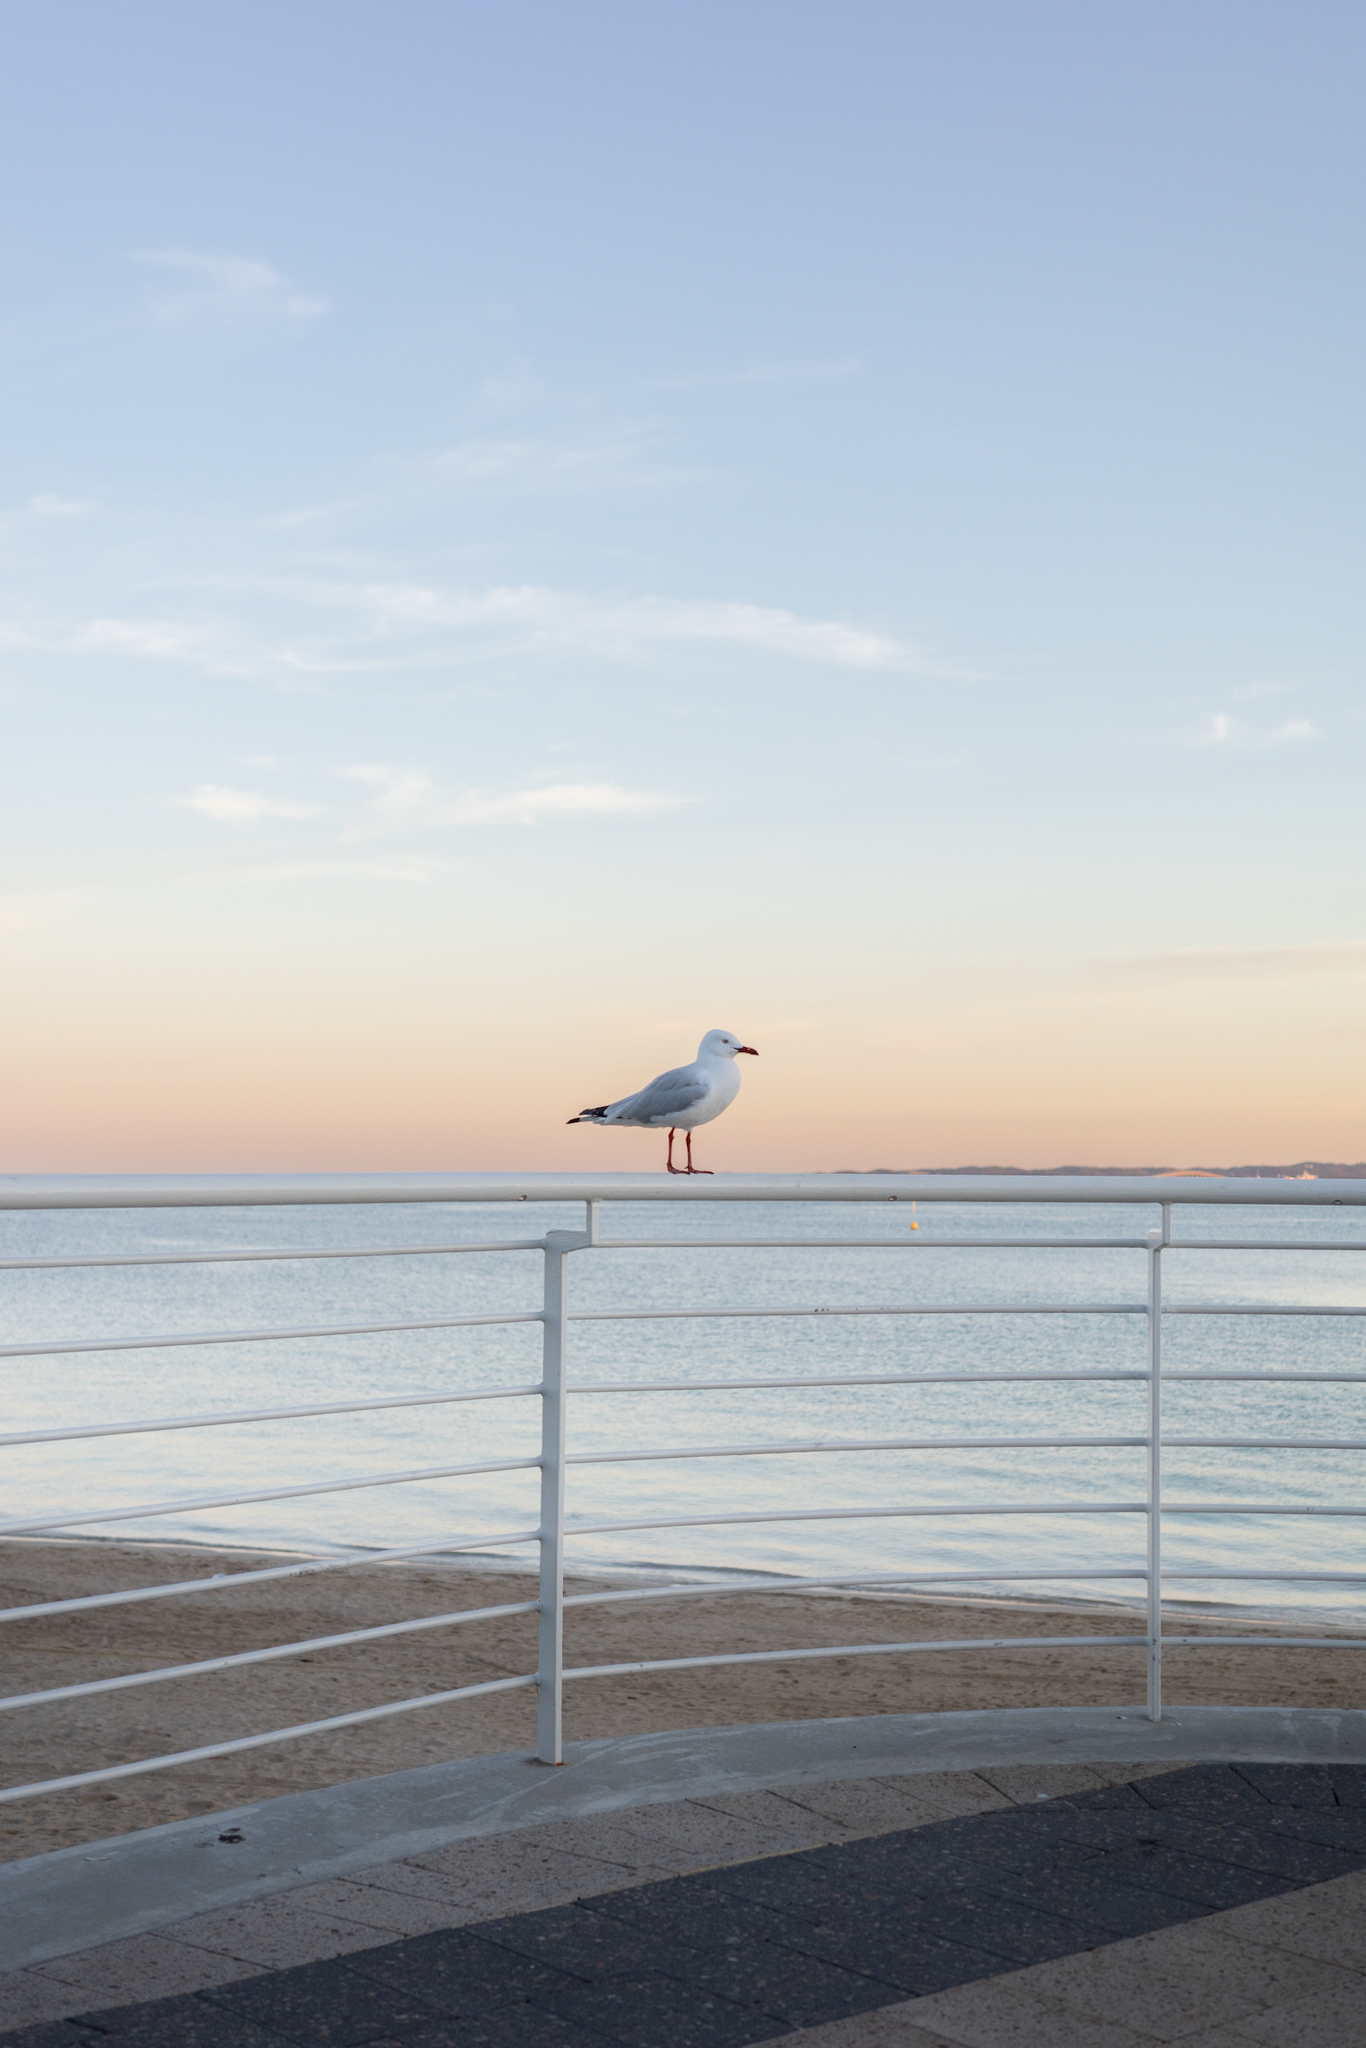 Auto-generated description: A seagull is perched on a railing with a calm sea and pastel sky in the background.